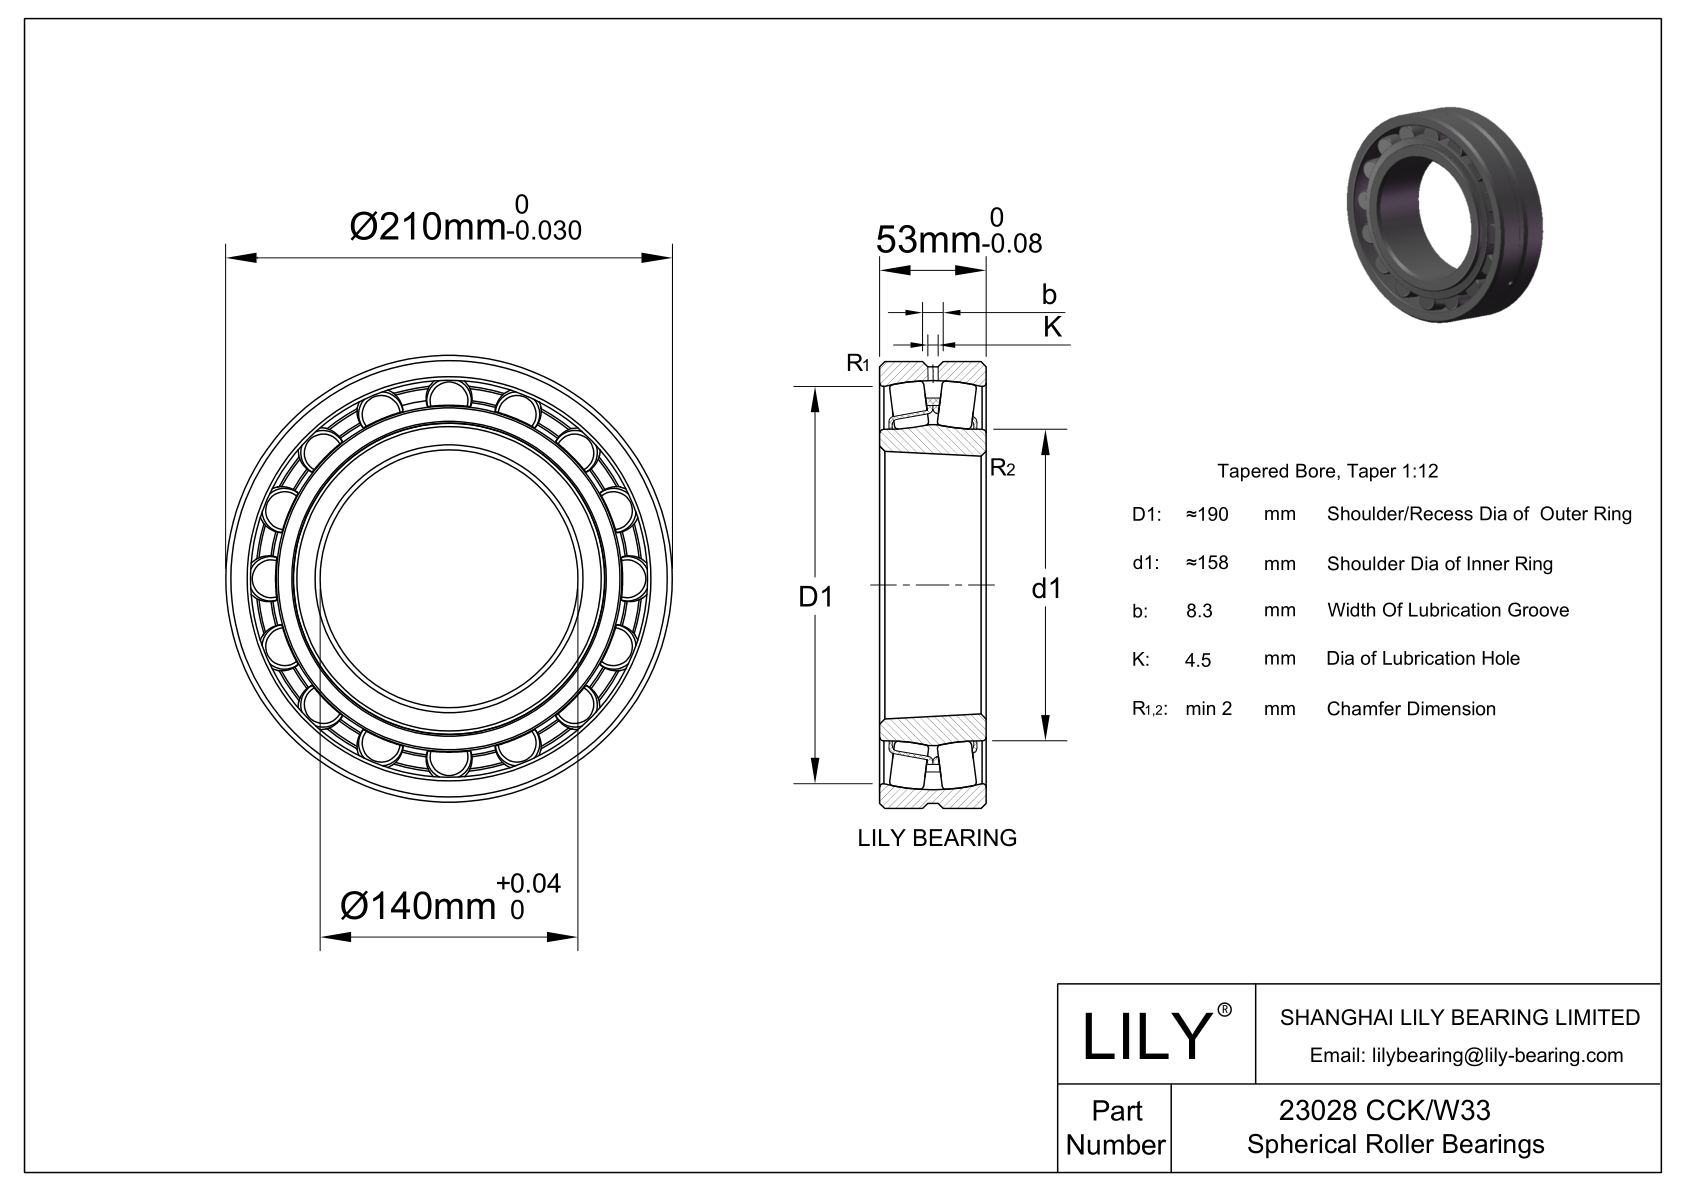 23028 CCK/W33 Double Row Spherical Roller Bearing cad drawing